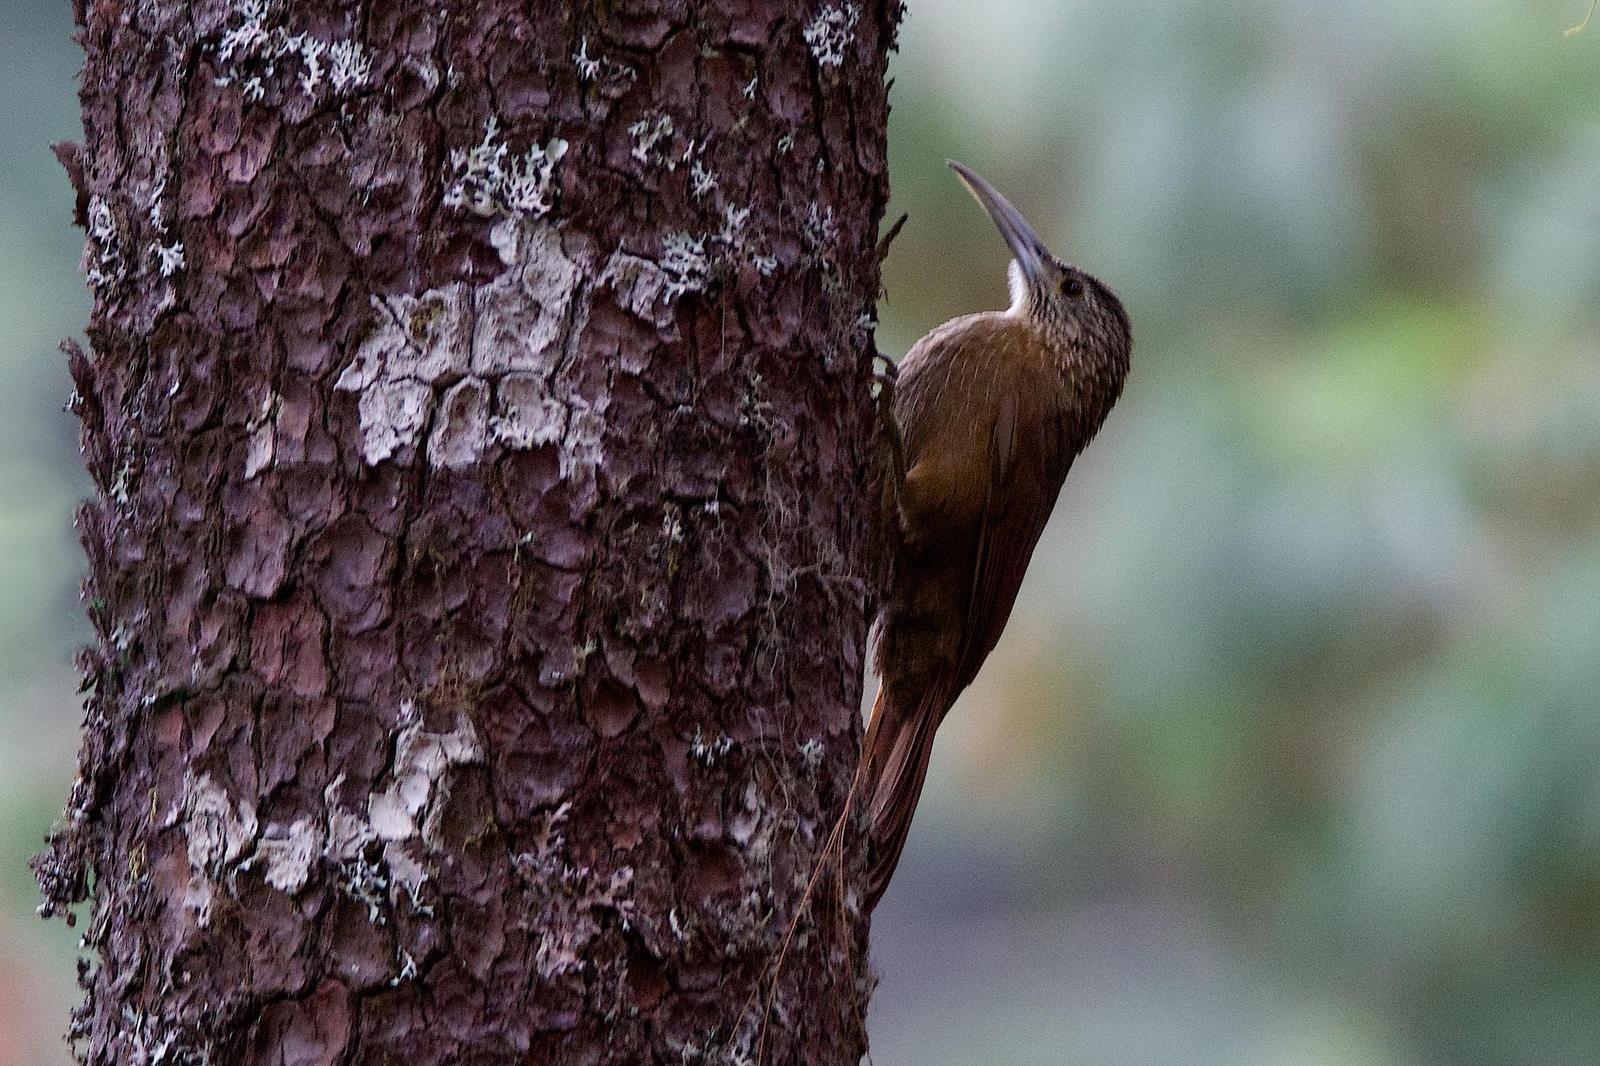 Strong-billed Woodcreeper Photo by Gerald Hoekstra